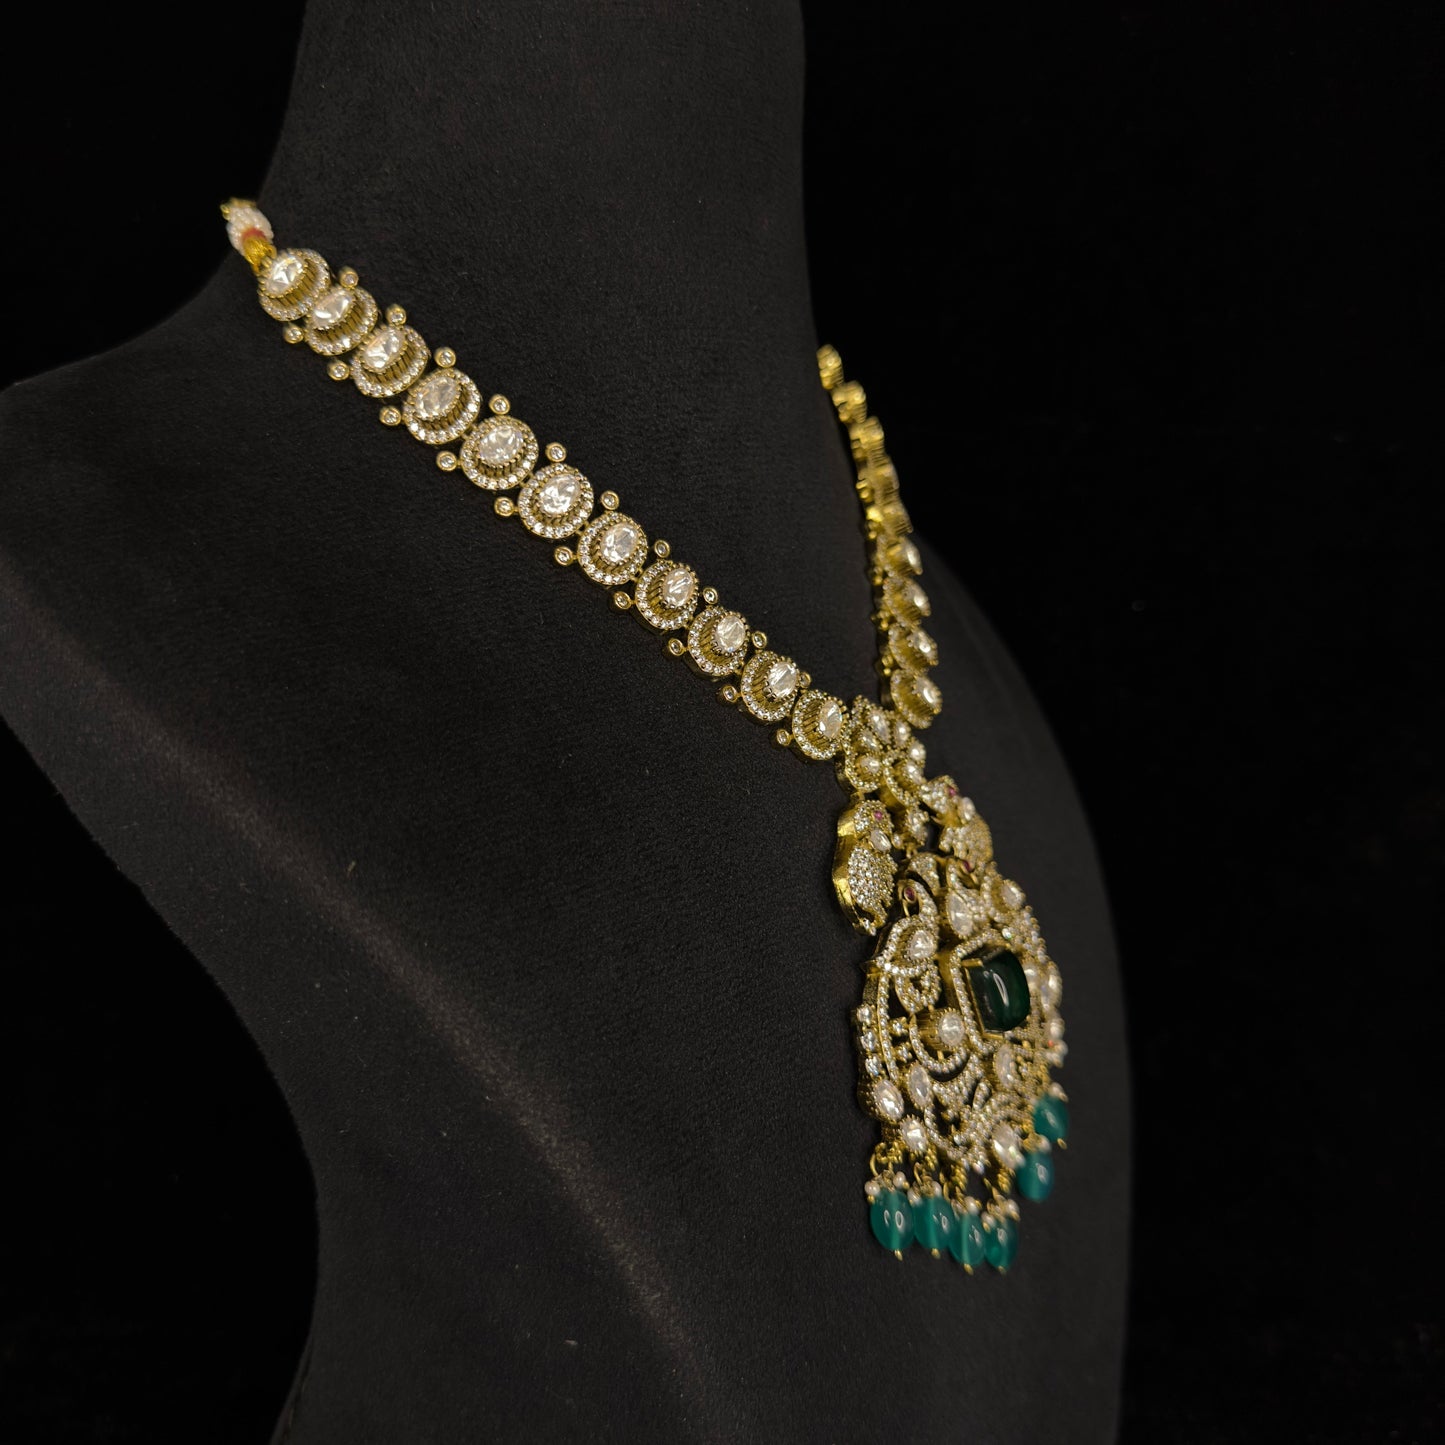 Iconic Peacock Victorian Necklace Set with freshwater pearls